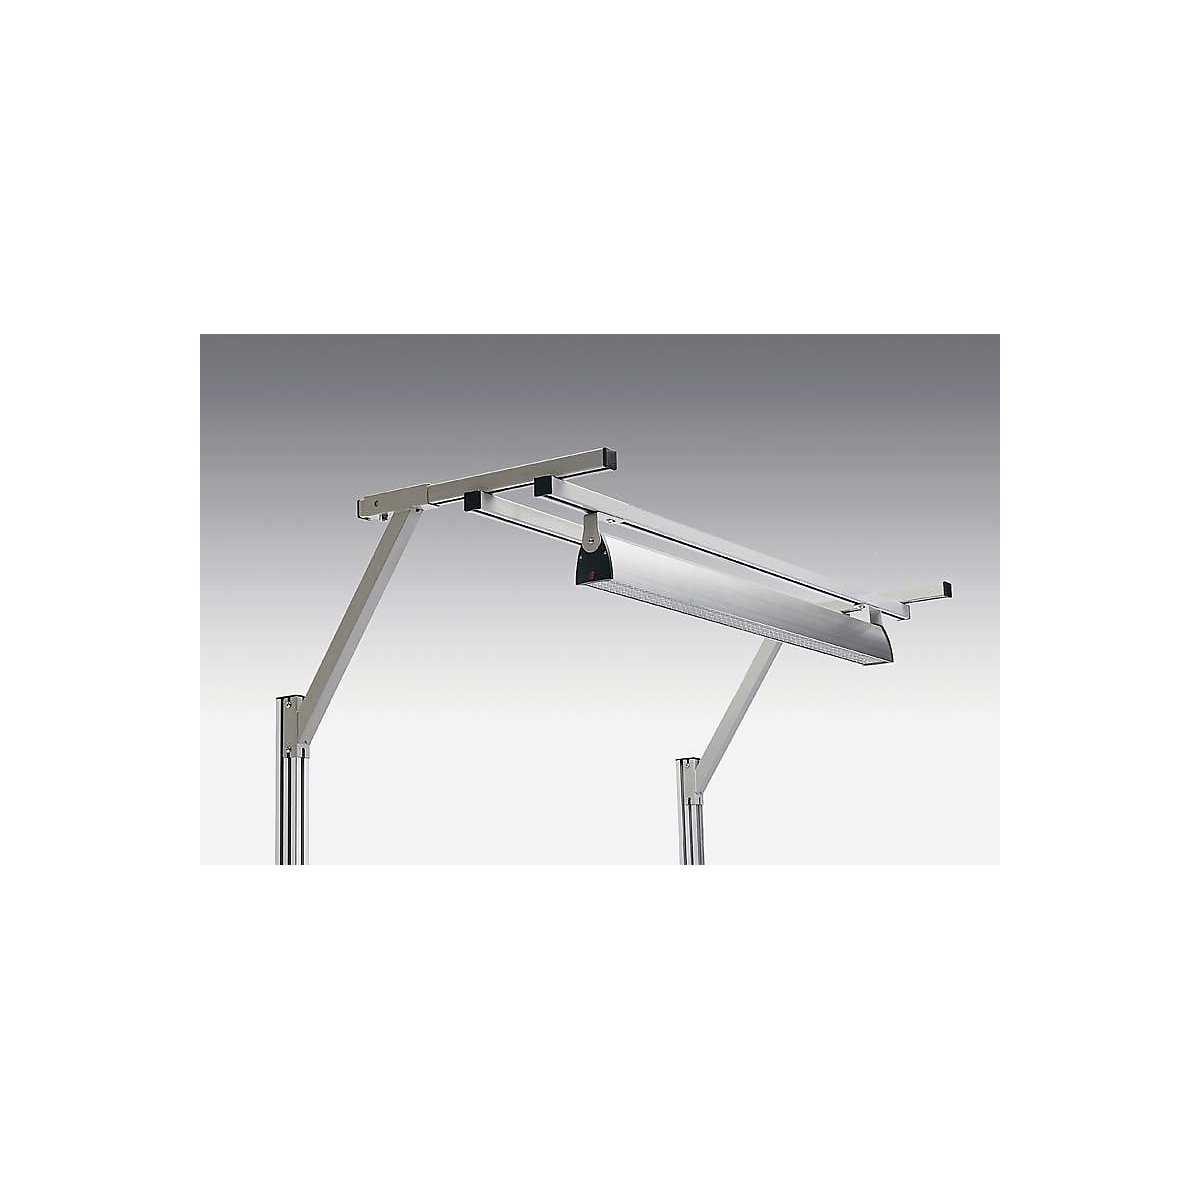 Support frame for work table – Treston (Product illustration 2)